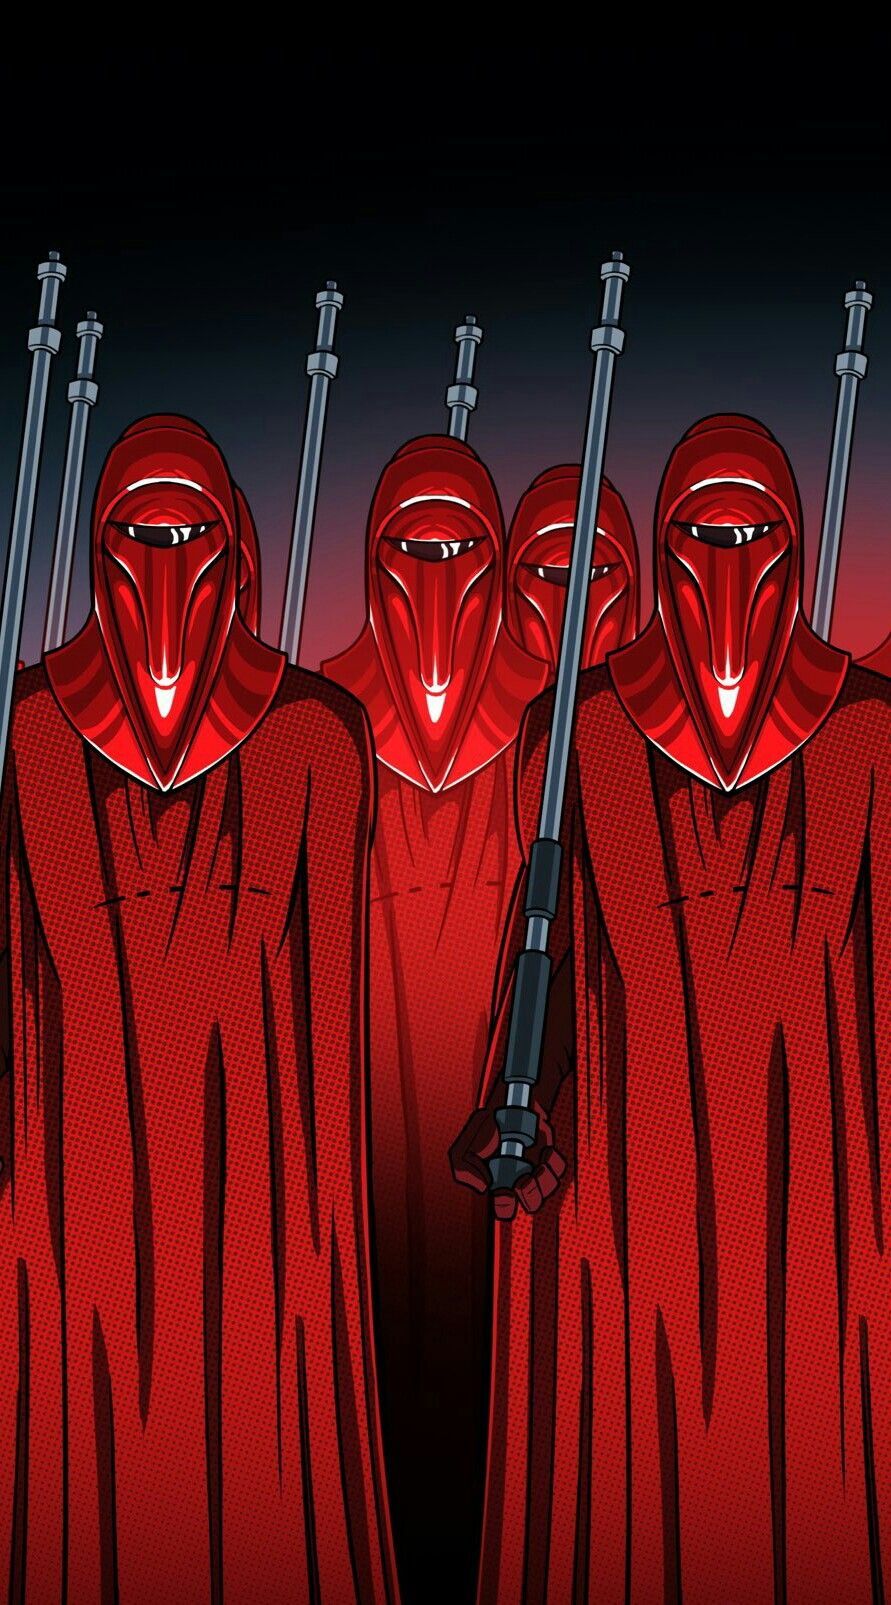 IMPERIAL RED GUARDS. Dark side star wars, Star wars sith, Star wars sith empire